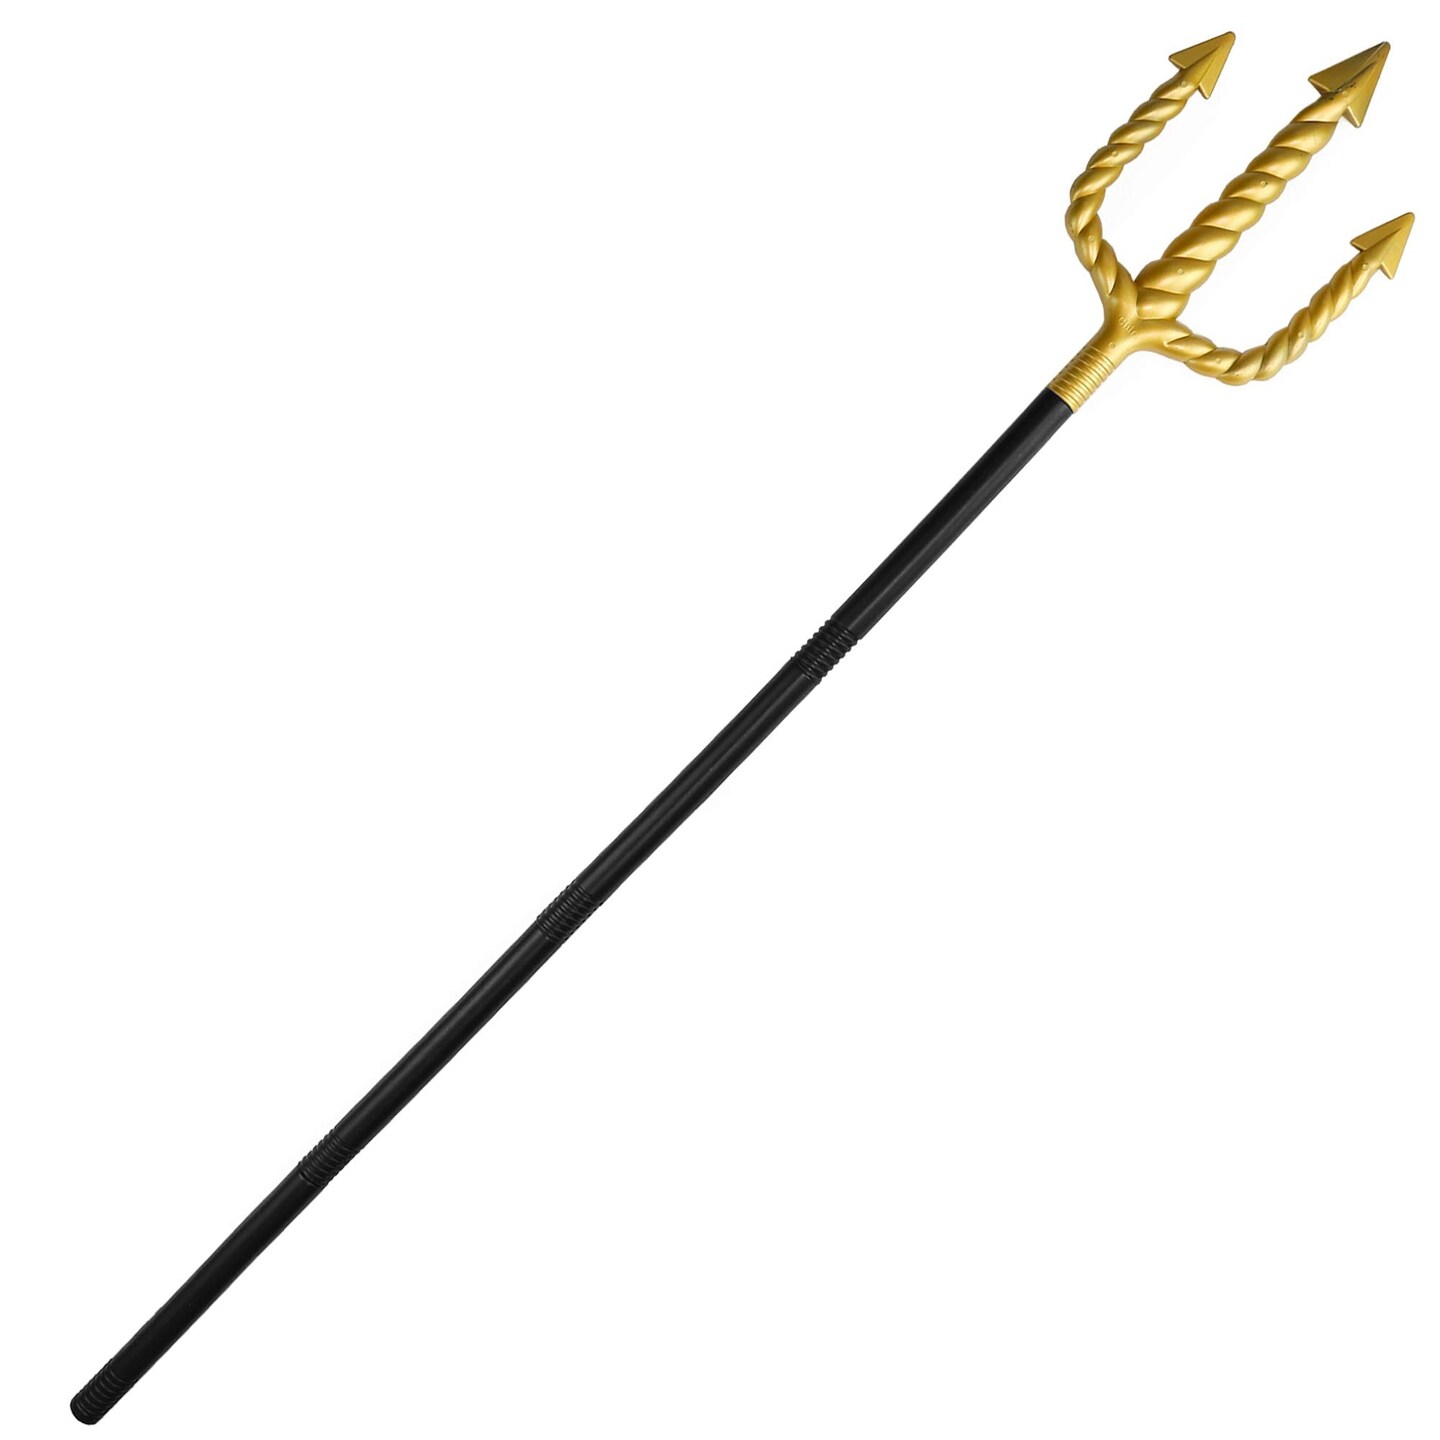 Gold Trident Costume Accessory - Golden Pitchfork Spear Toy Prop Weapon Staff Accessories for Adults and Kids Costumes